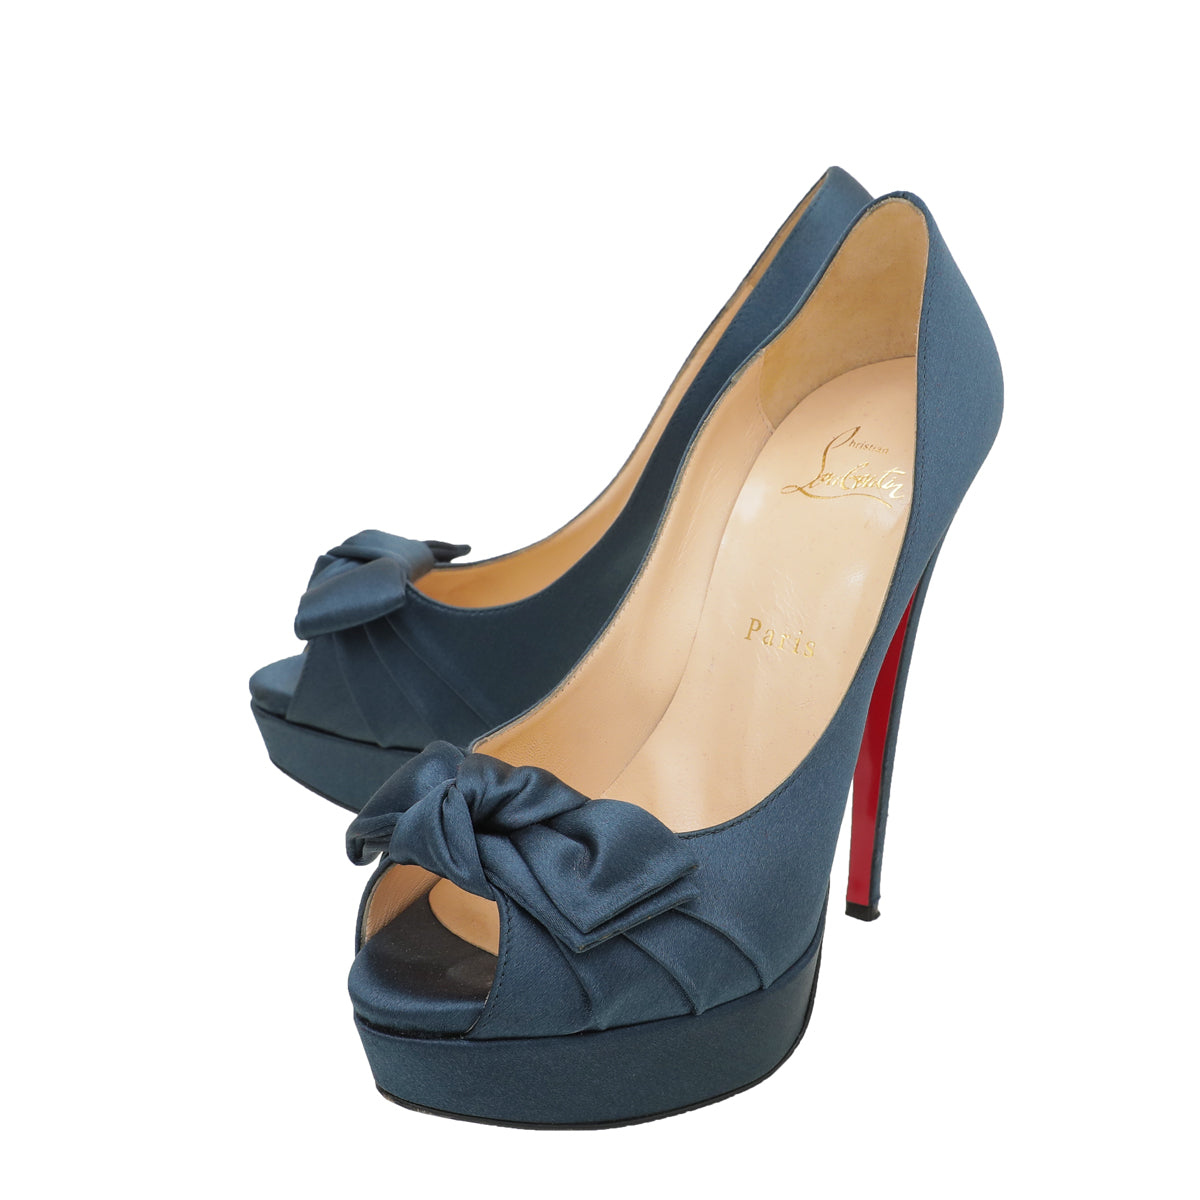 Christian Louboutin Teal Satin Madame Butterfly 150 Pumps 38.5